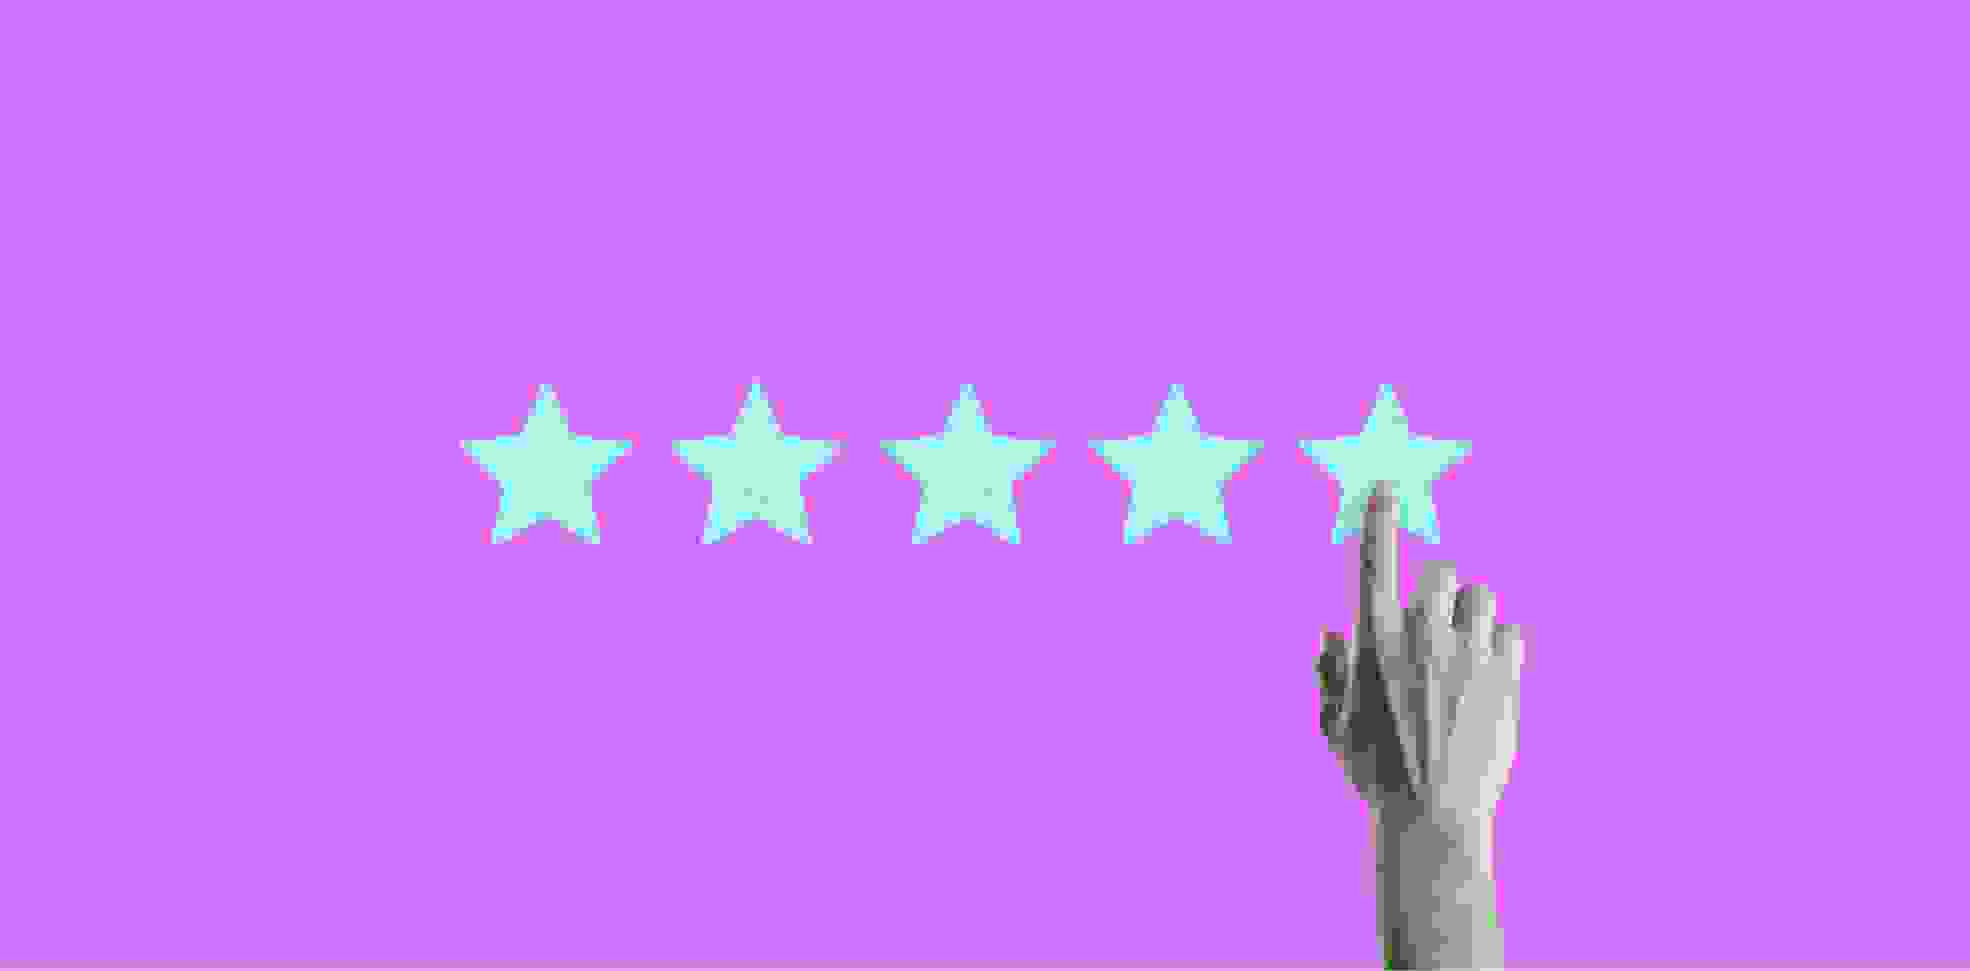 5 stars and a hand on purple background